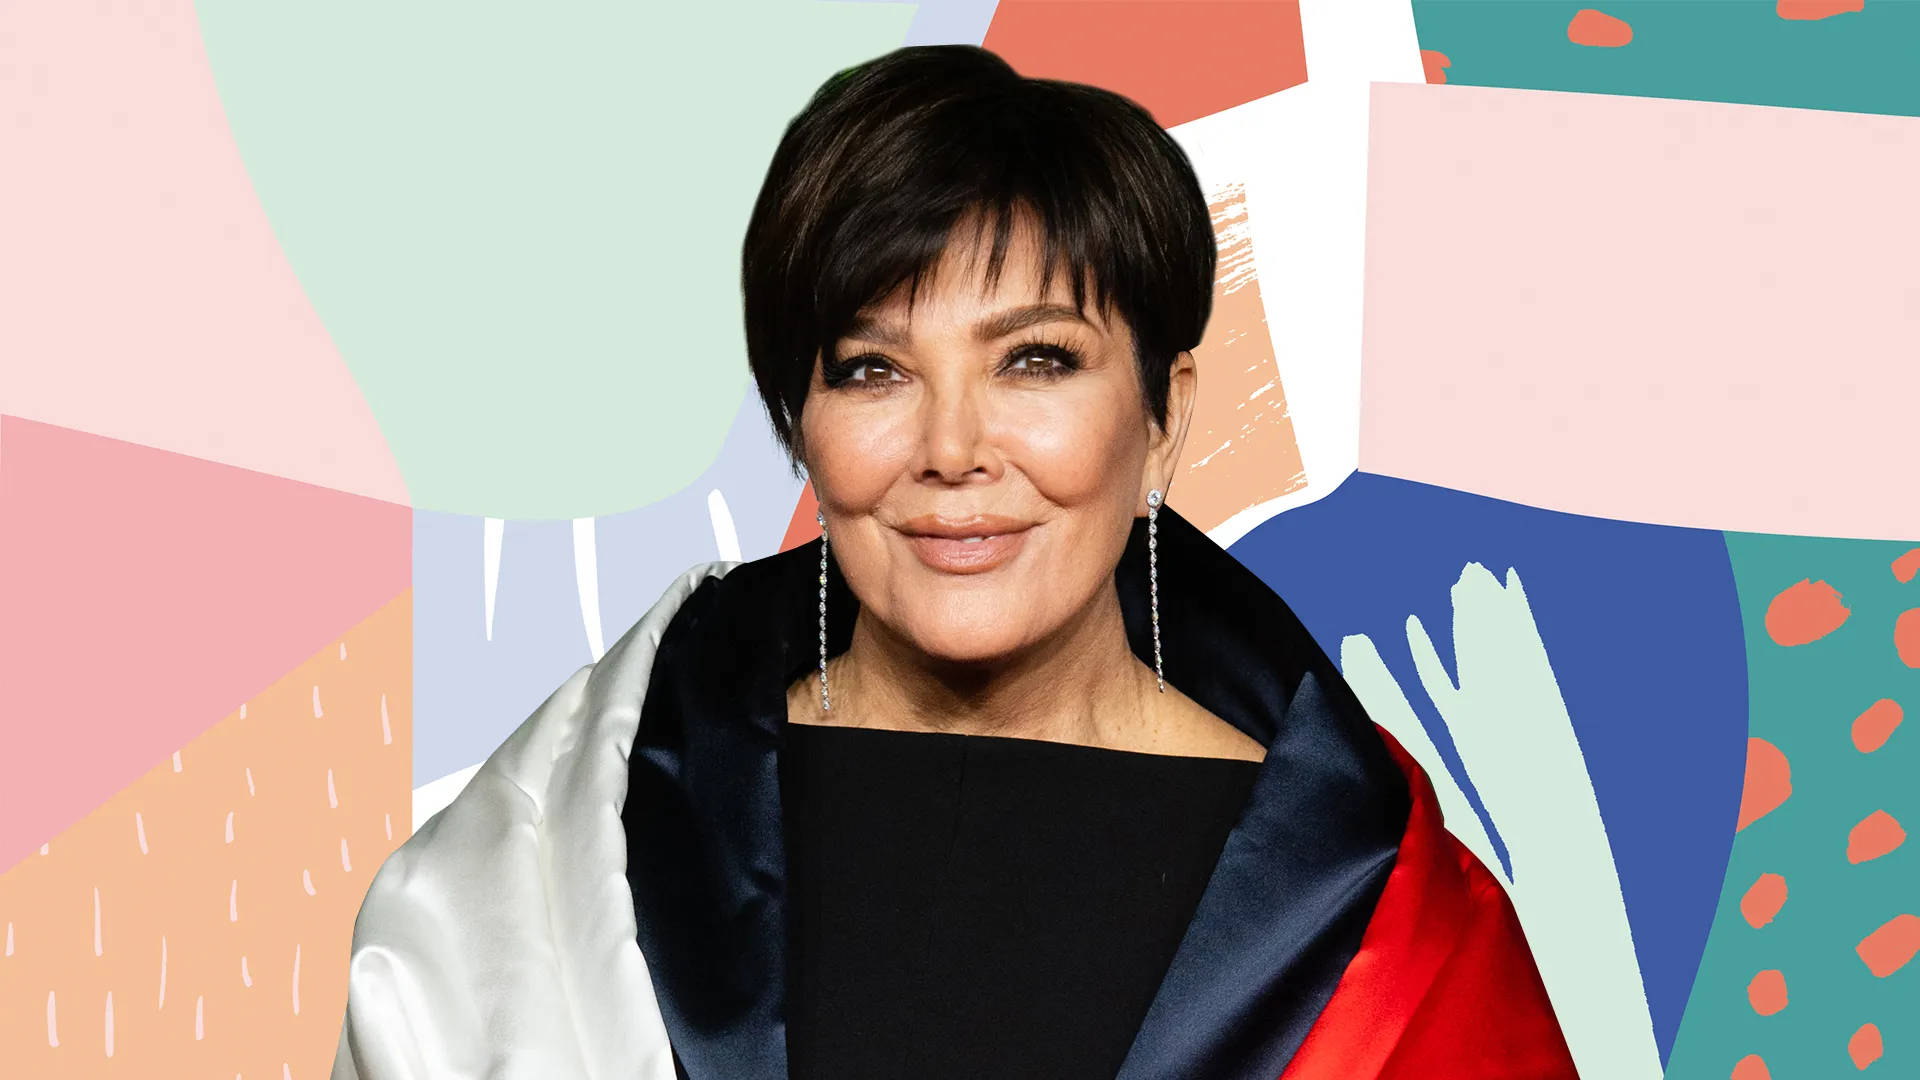 Kris Jenner Multi-colored Outfit